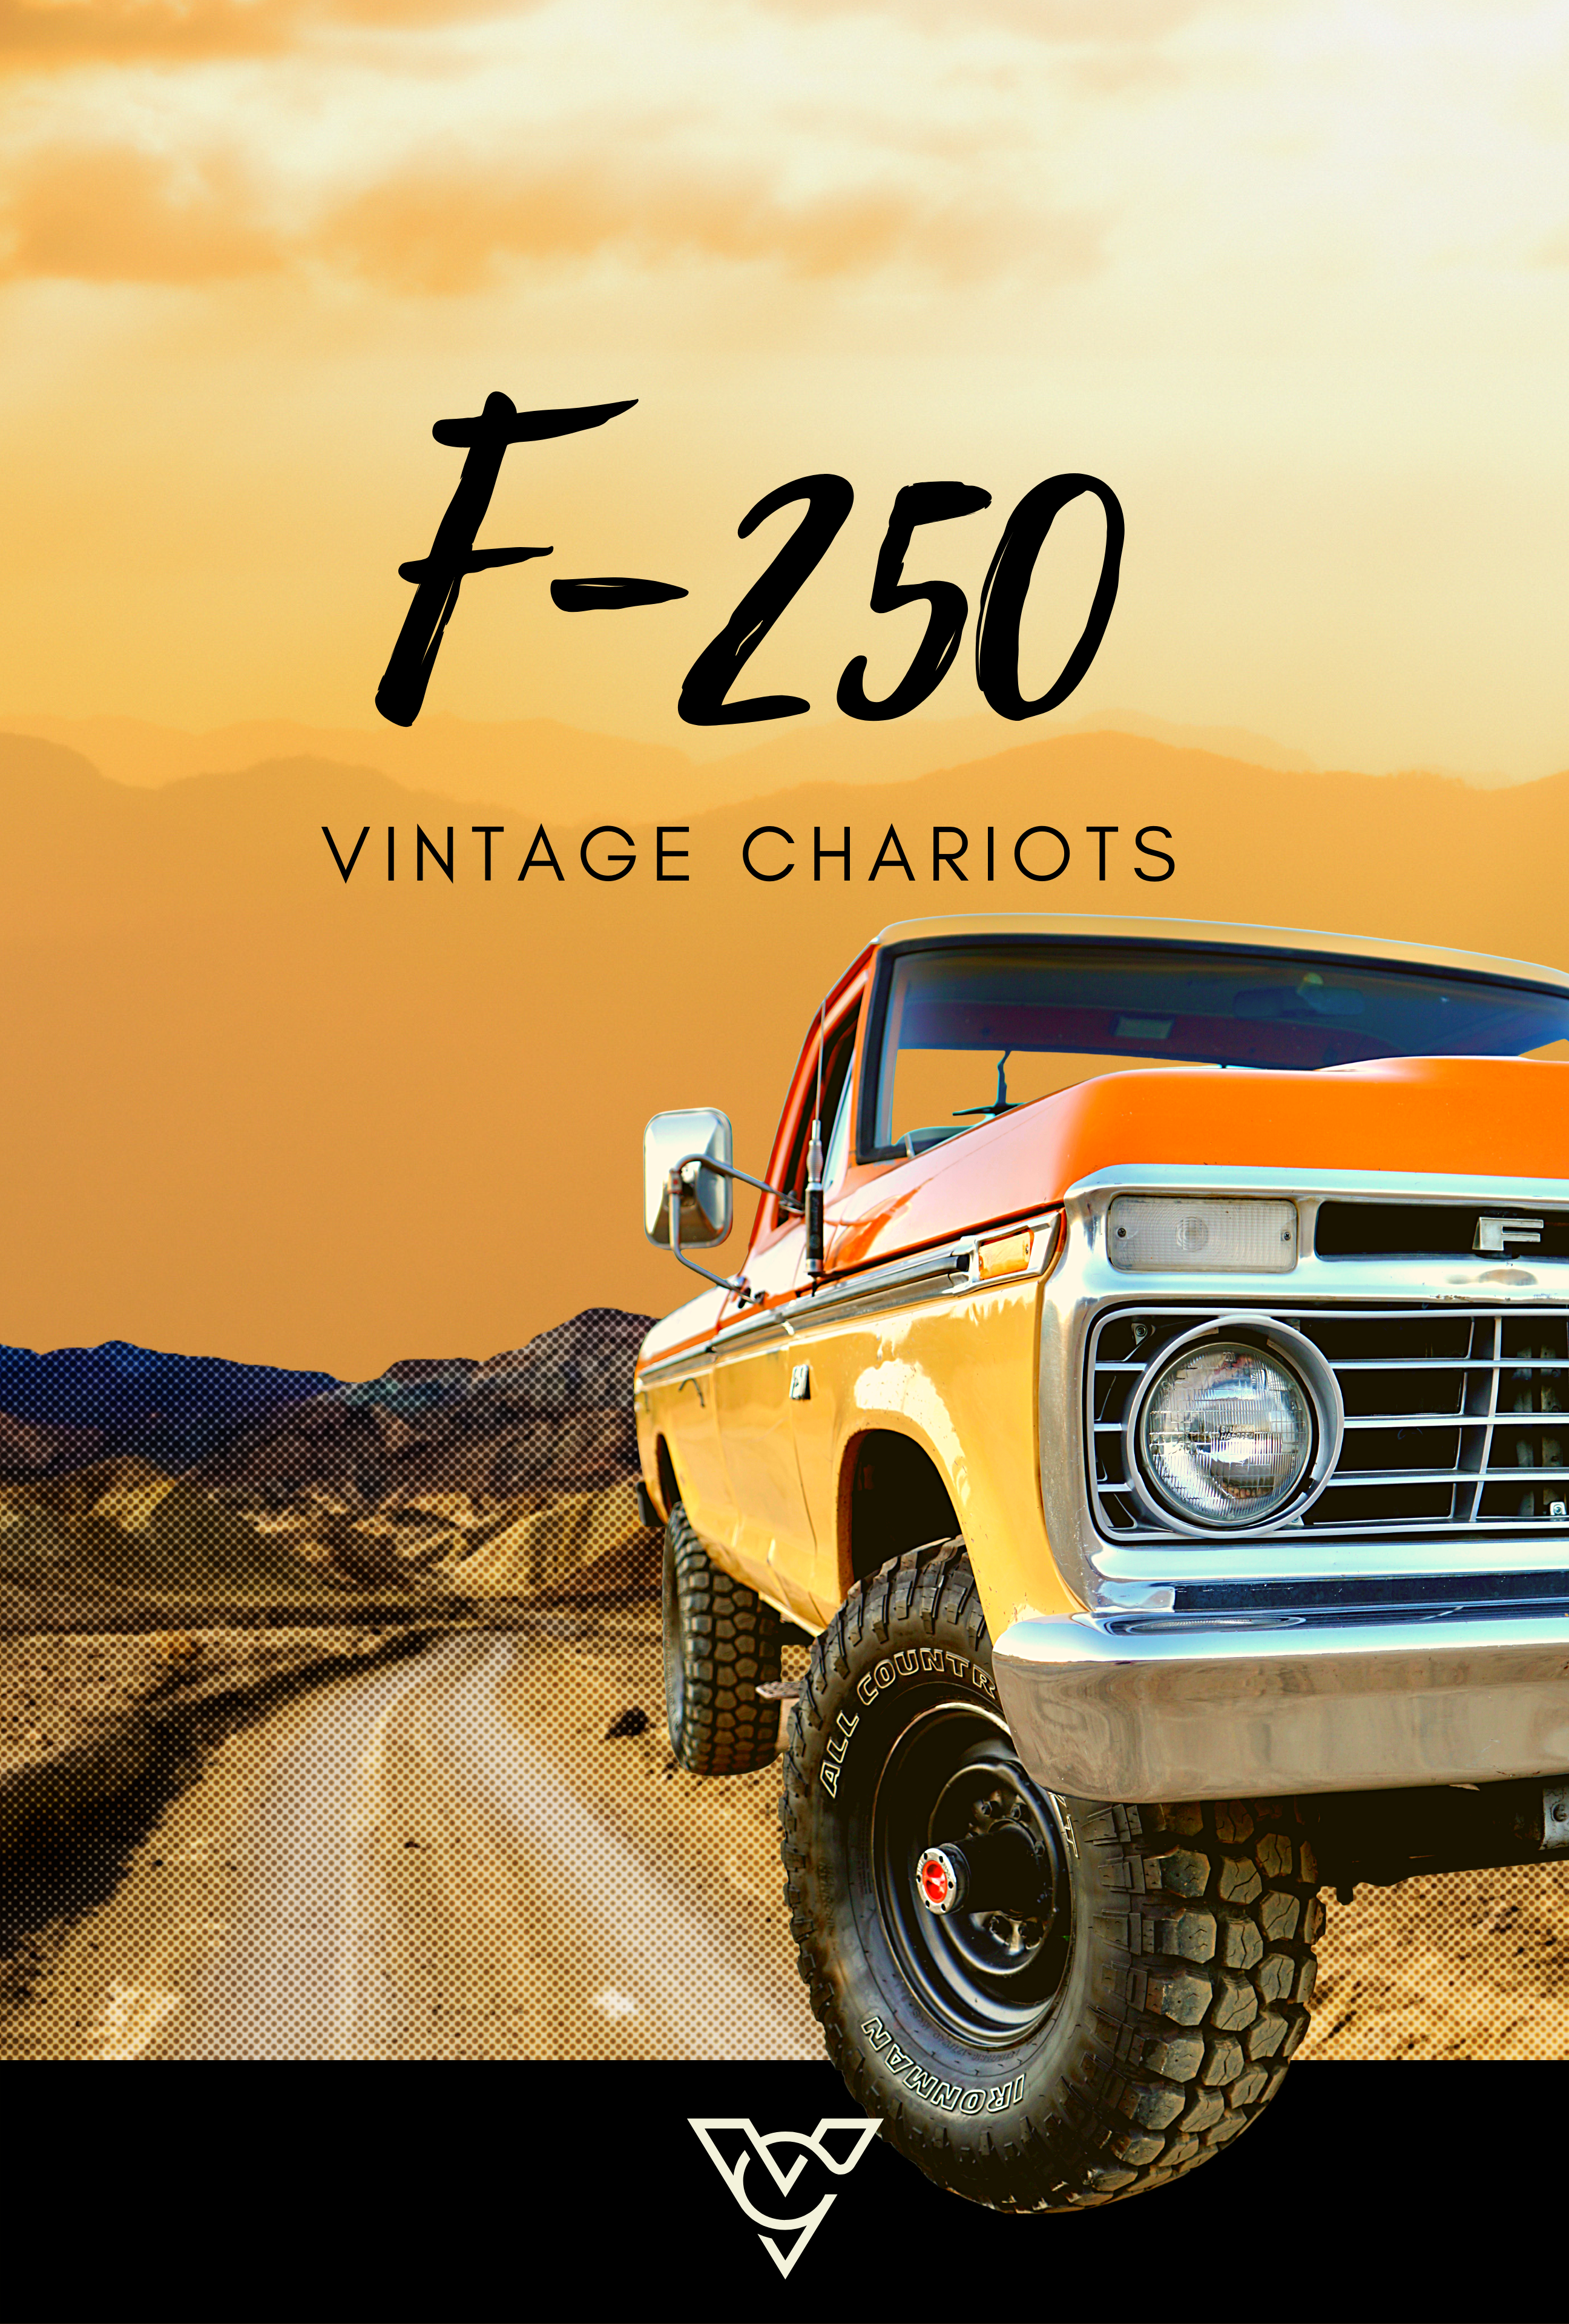 Parrot F-250 (POSTER)